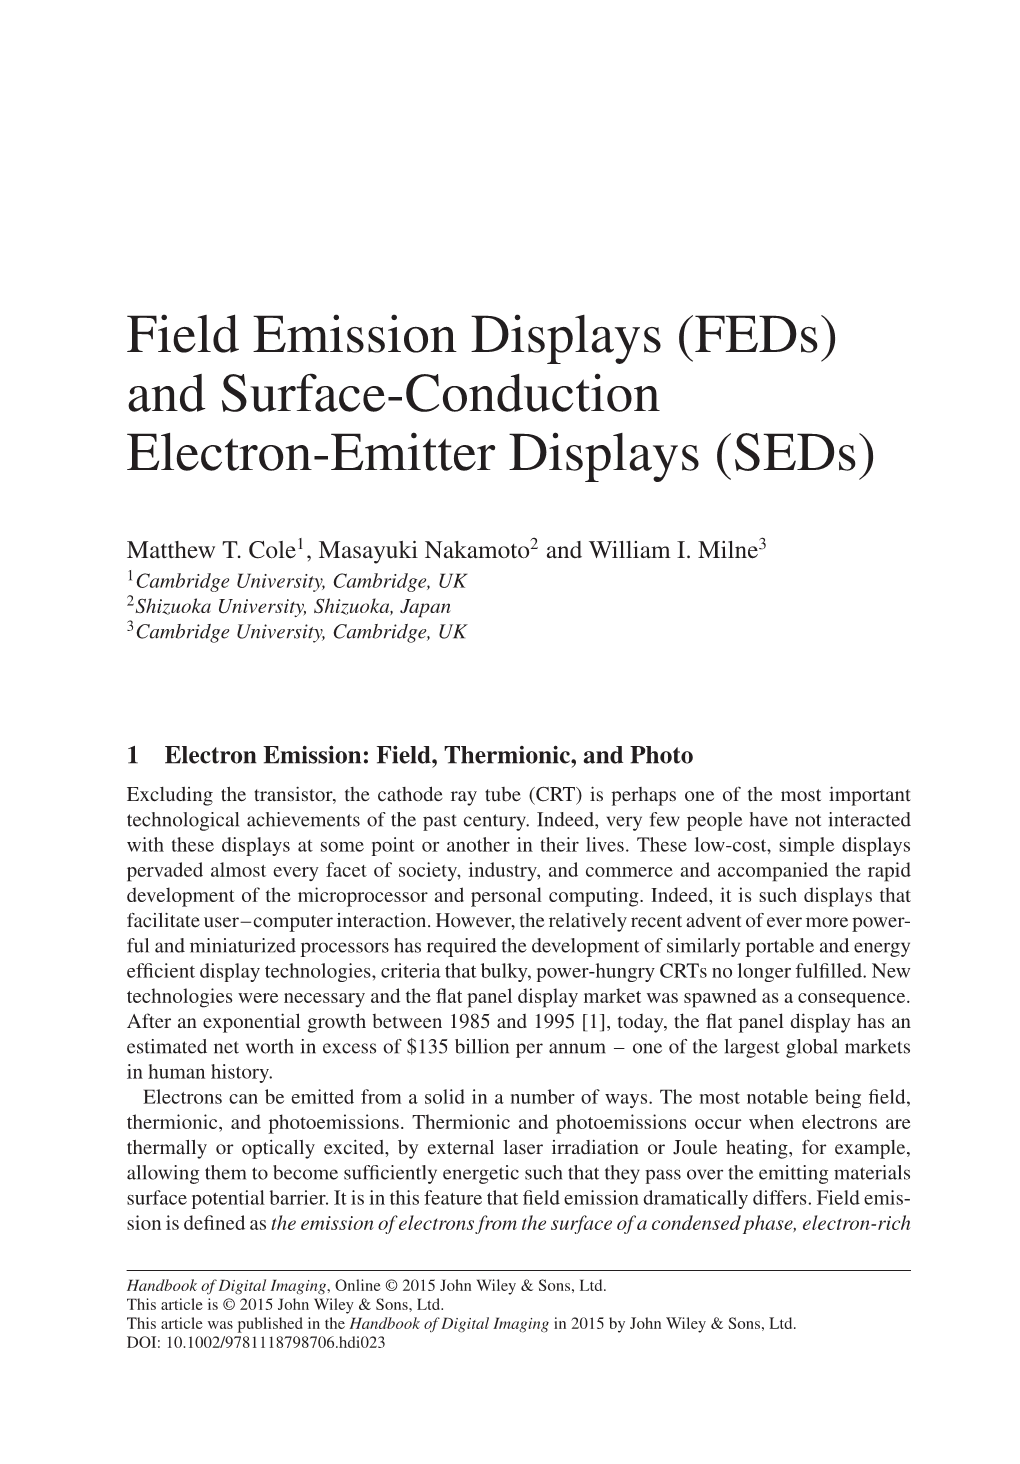 "Field Emission Displays (Feds) and Surface-Conduction Electron